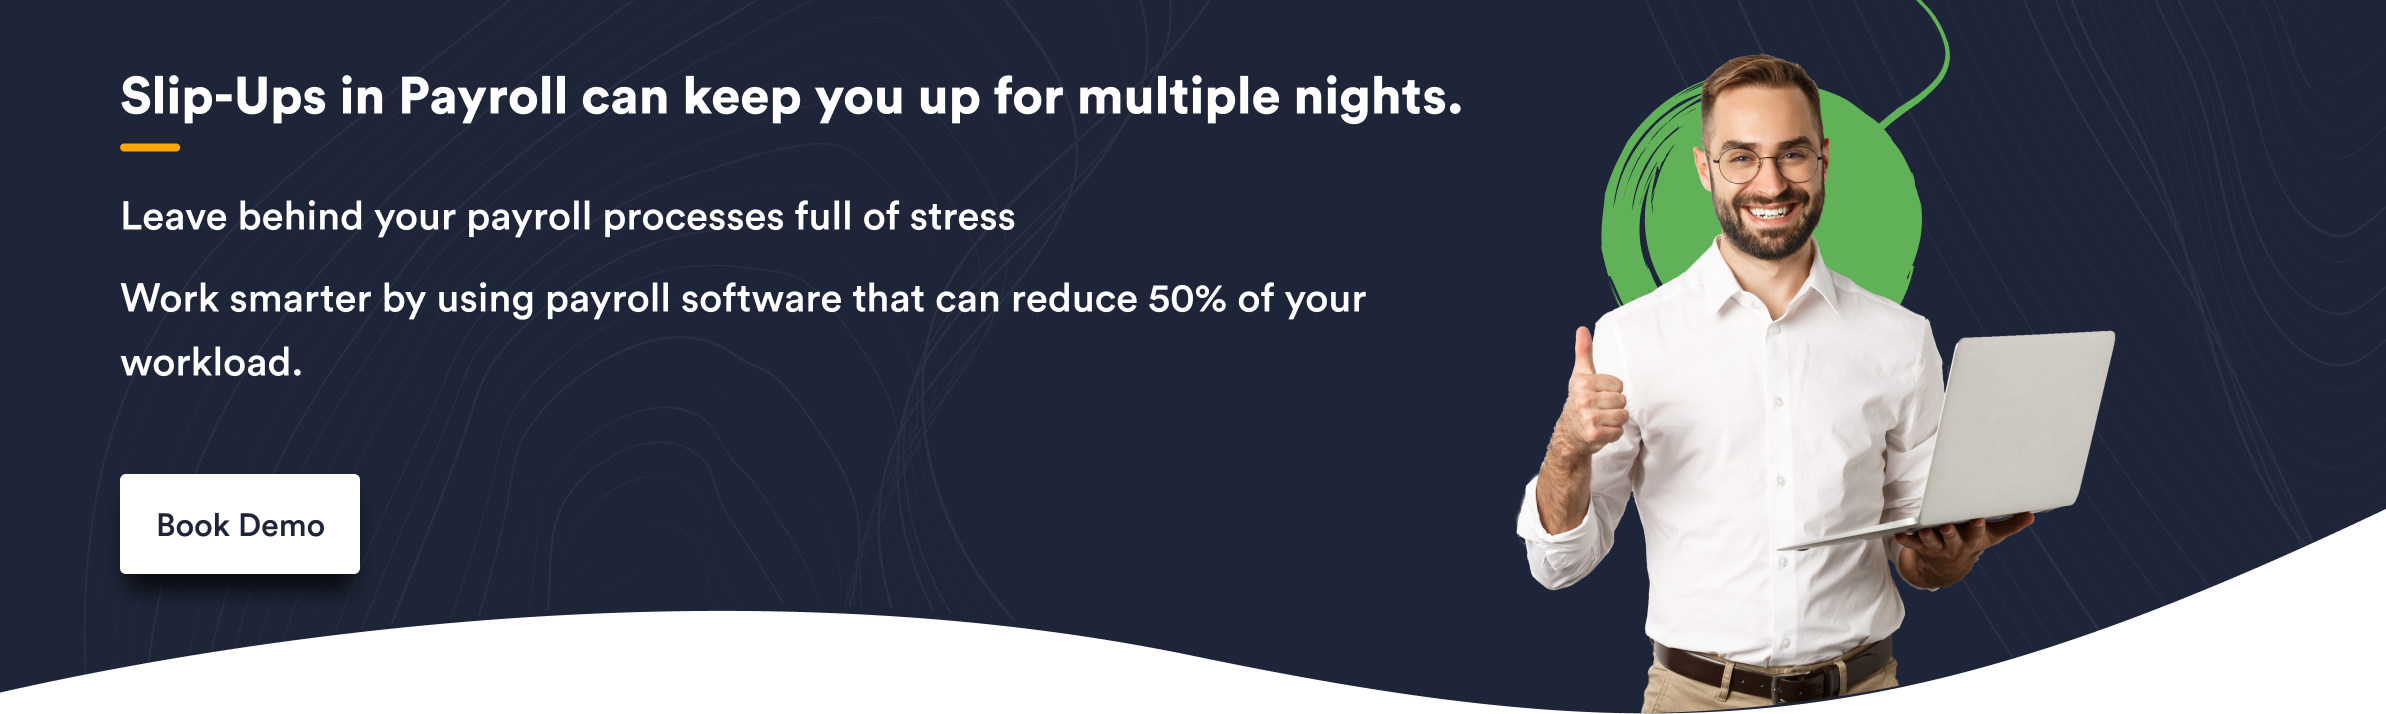 Slip Ups in Payroll can keep you up for multiple nights.